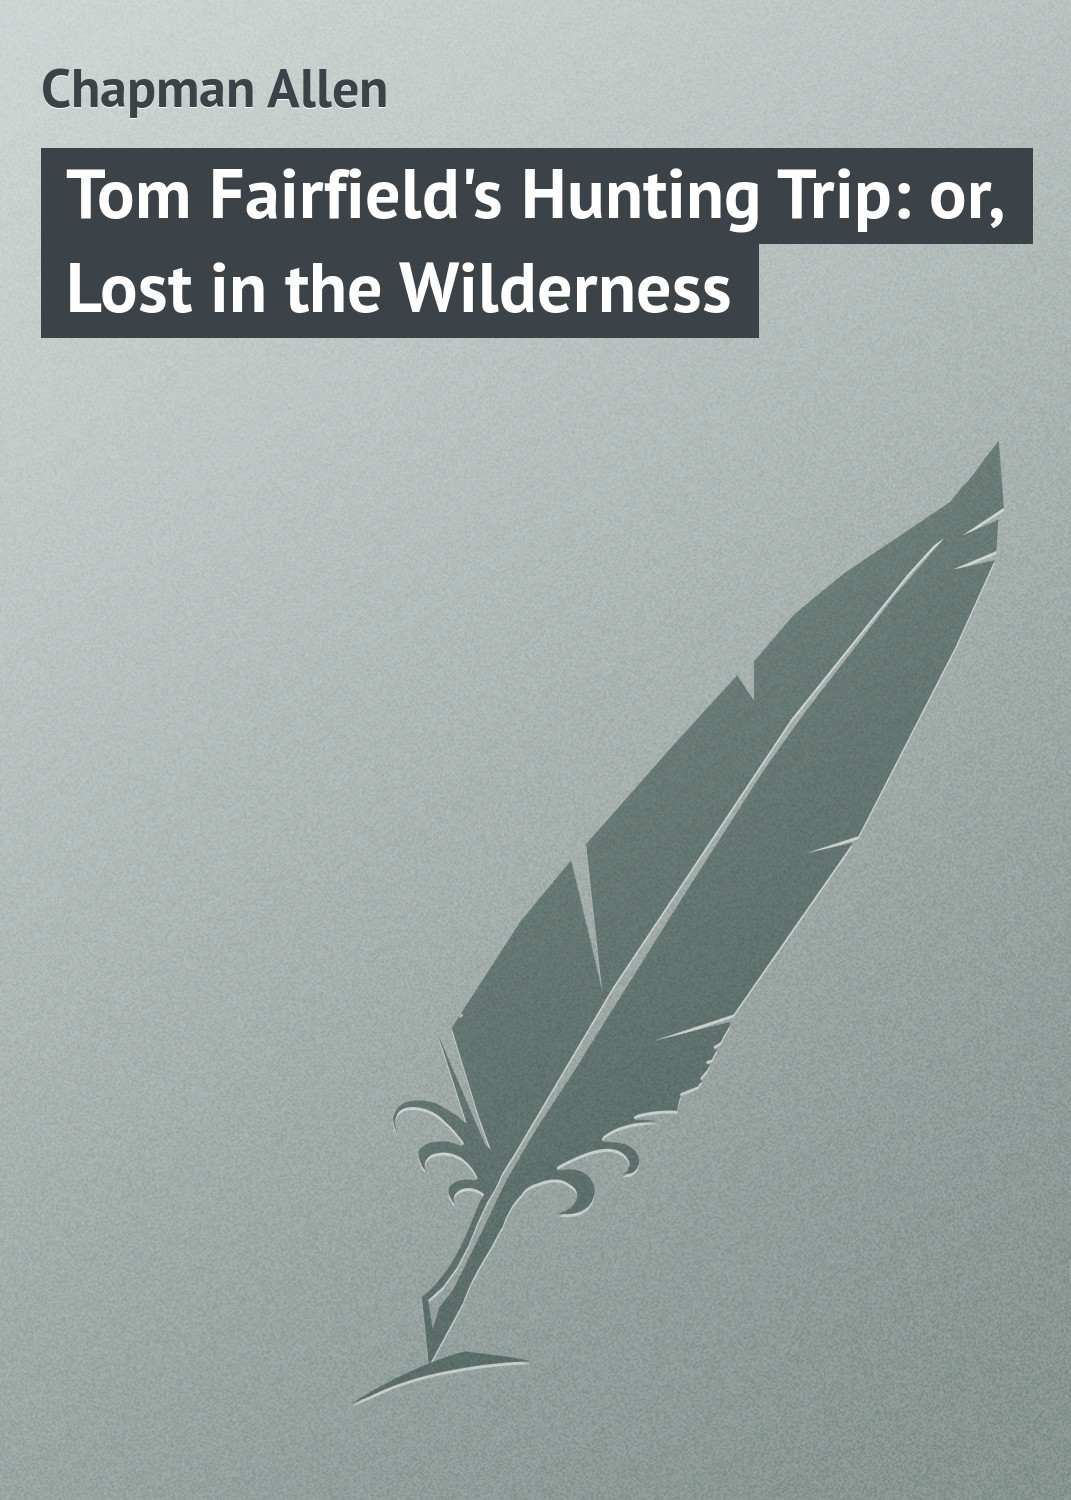 Tom Fairfield's Hunting Trip: or, Lost in the Wilderness